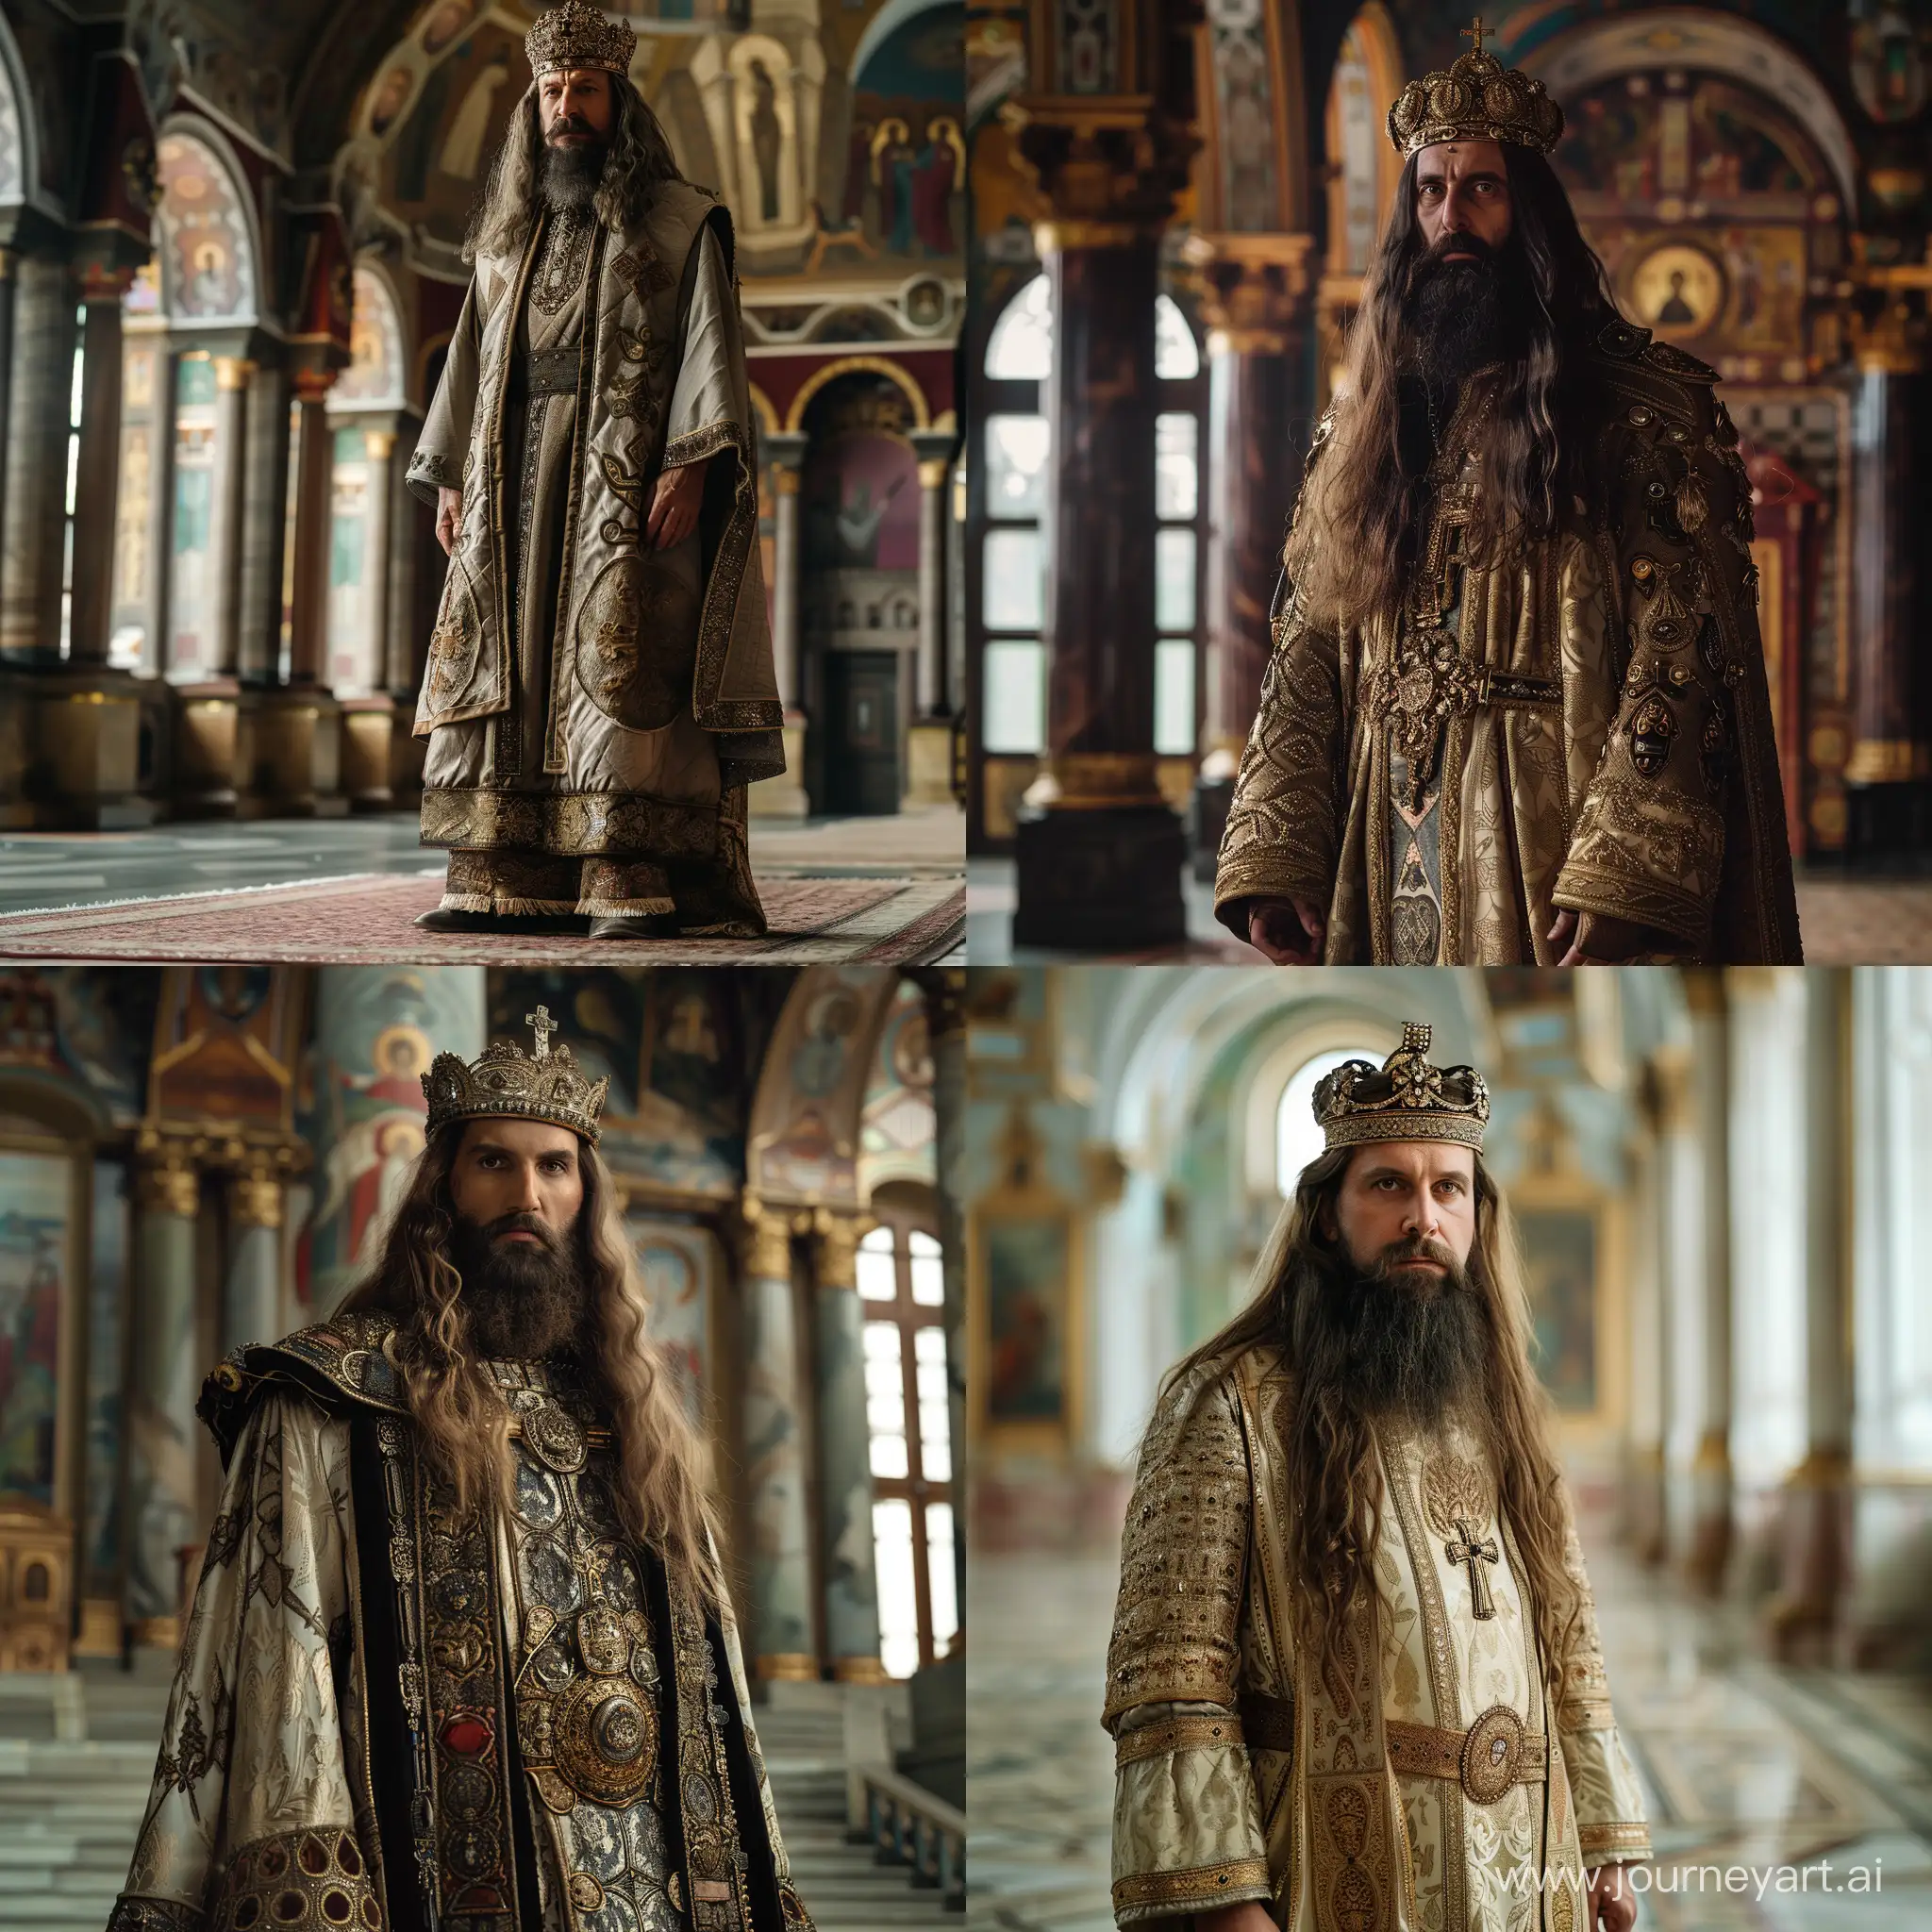 Realistic image of Bulgarian Tsar Ivan Alexander standing tall in the palace. He has medium long hair and long beard. Wearing Orthodox Christian emperor attire and crown. Cinematic shot